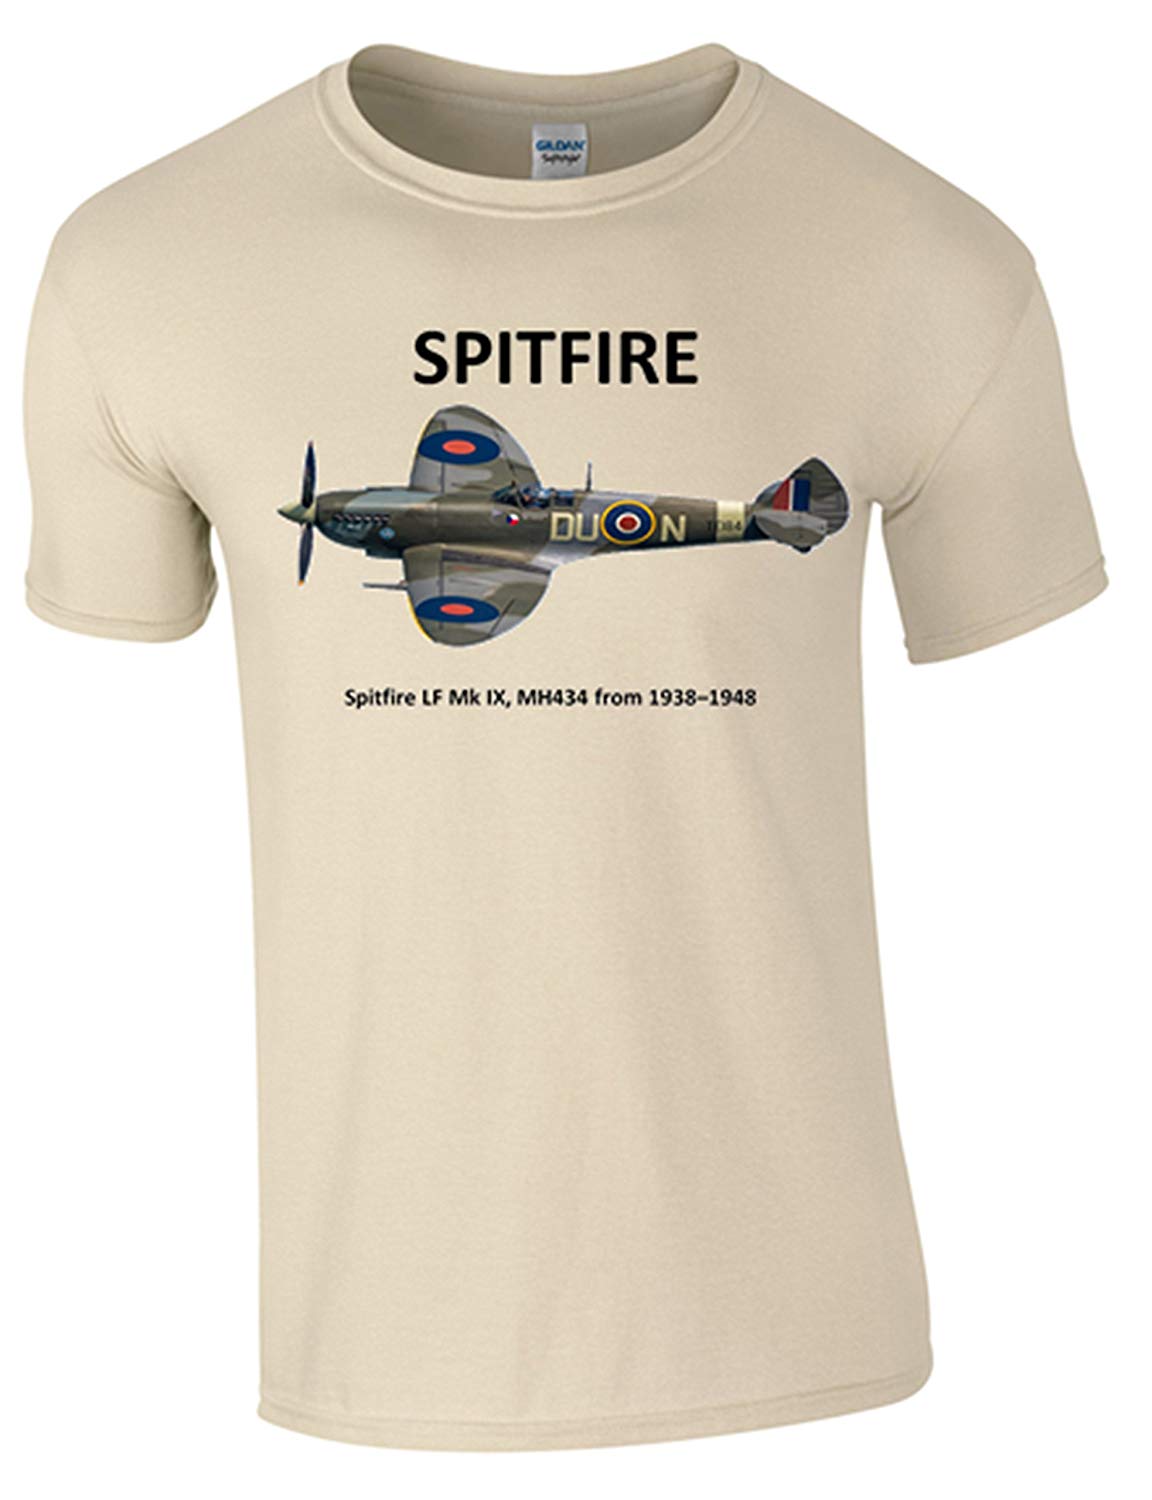 Spitfire T-Shirt - Army 1157 kit Sand / XL Army 1157 Kit Veterans Owned Business